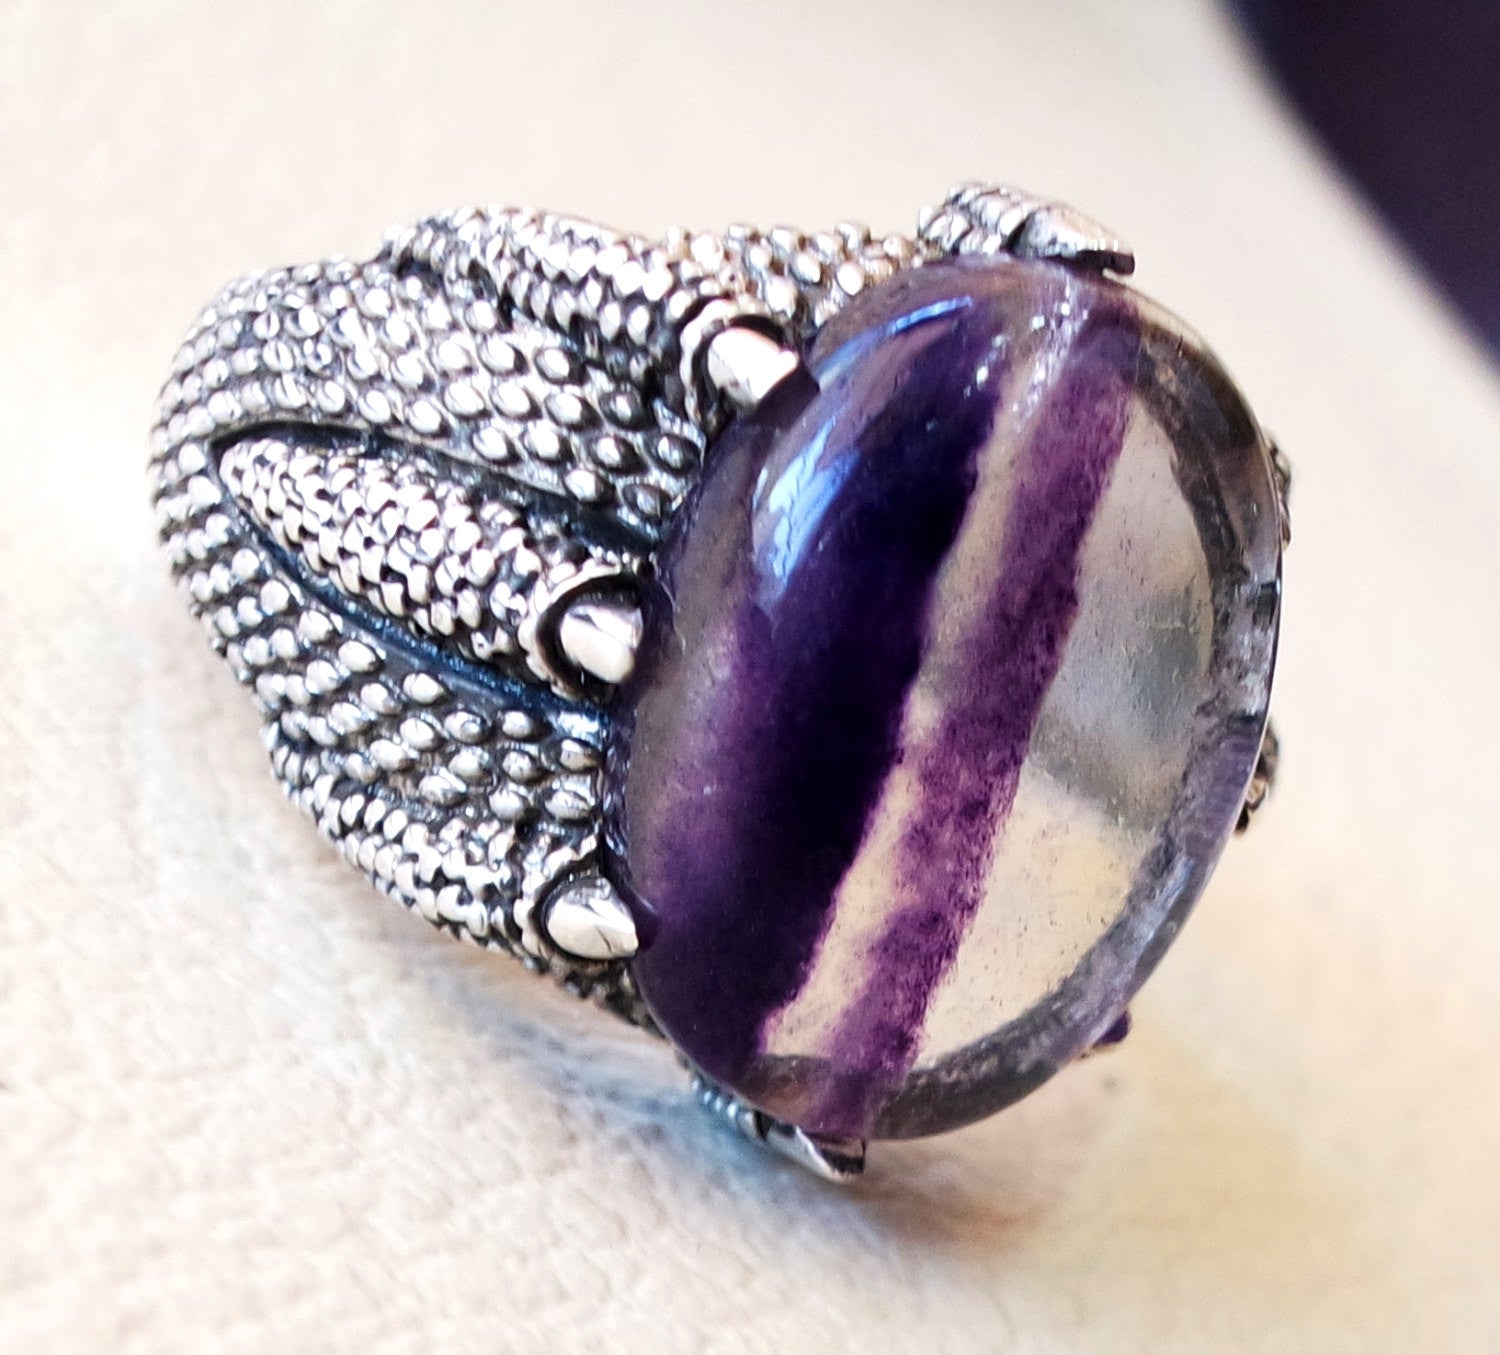 natural fluorite purple huge men dragon snake ring sterling silver 925 color unique stone all sizes jewelry fast shipping oxidized style